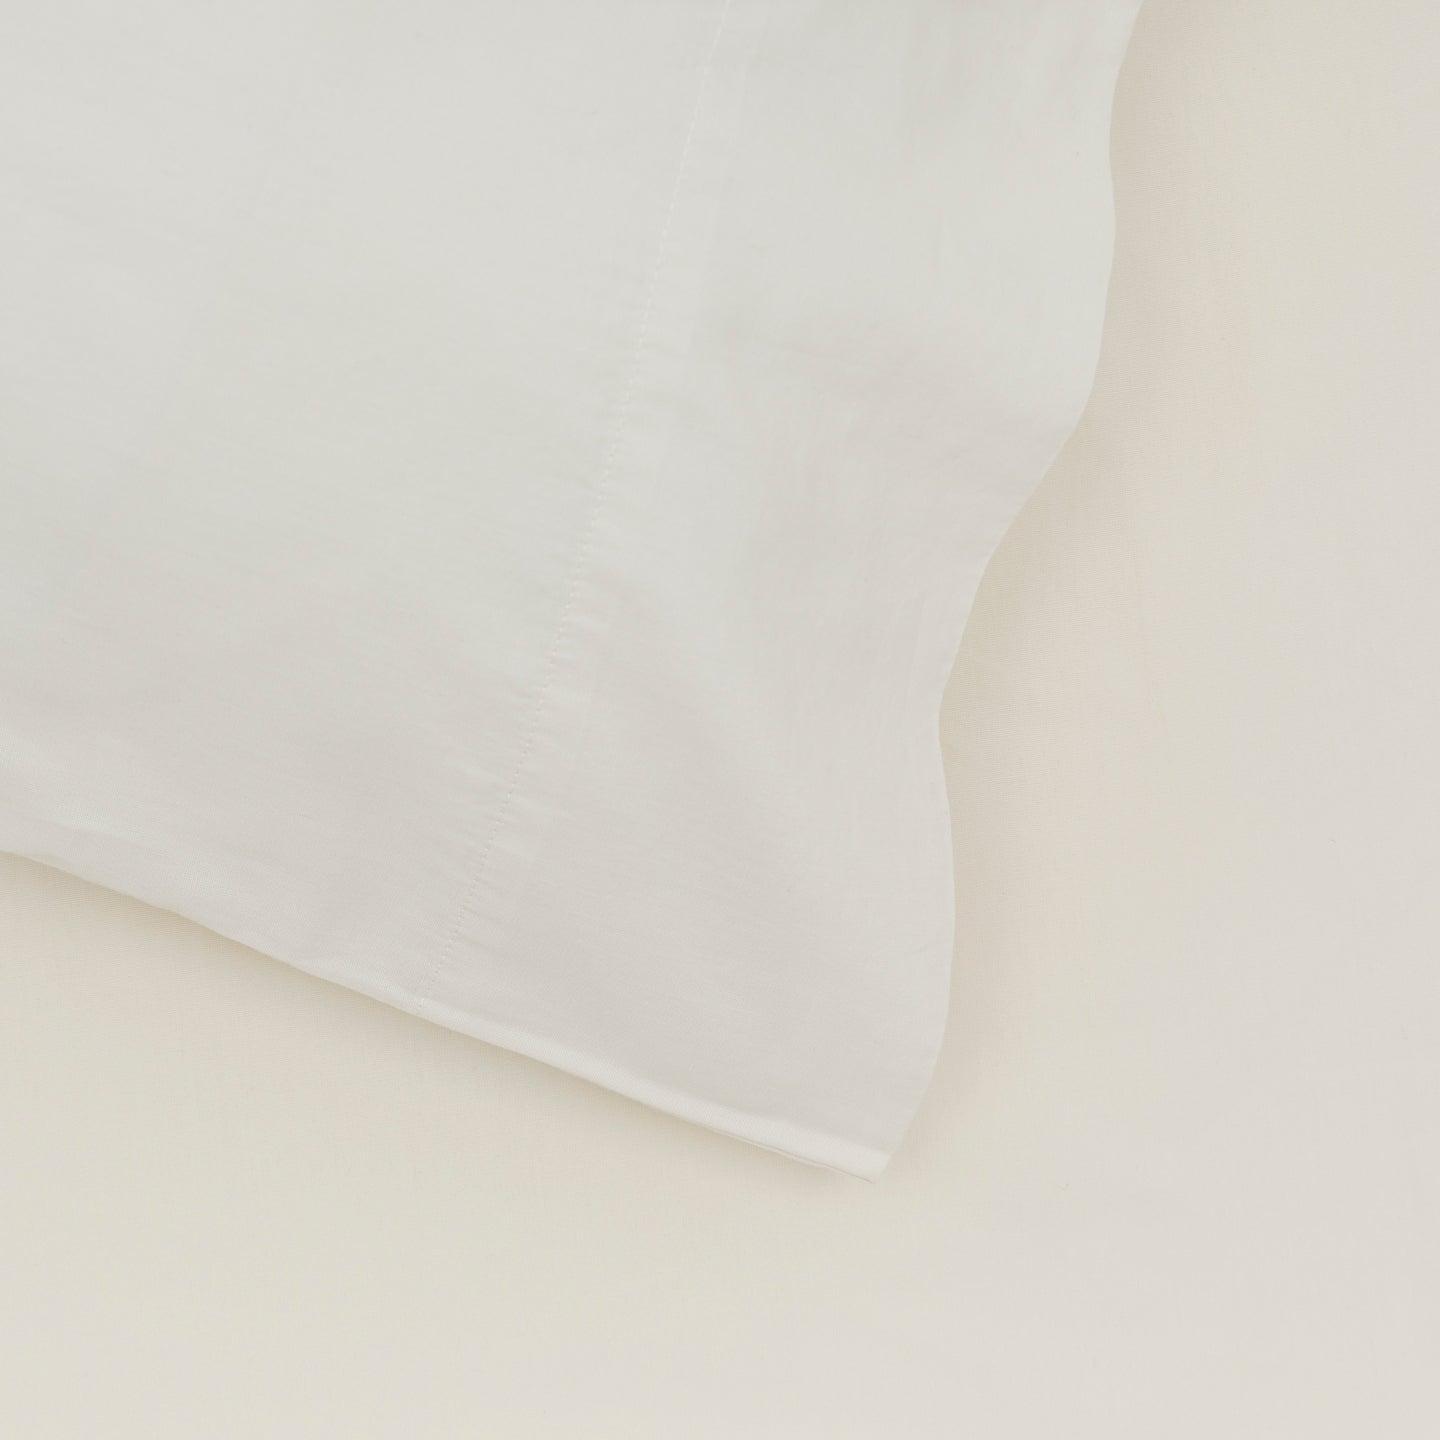 Essential Percale Pillowcases, Set of 2 - Ivory